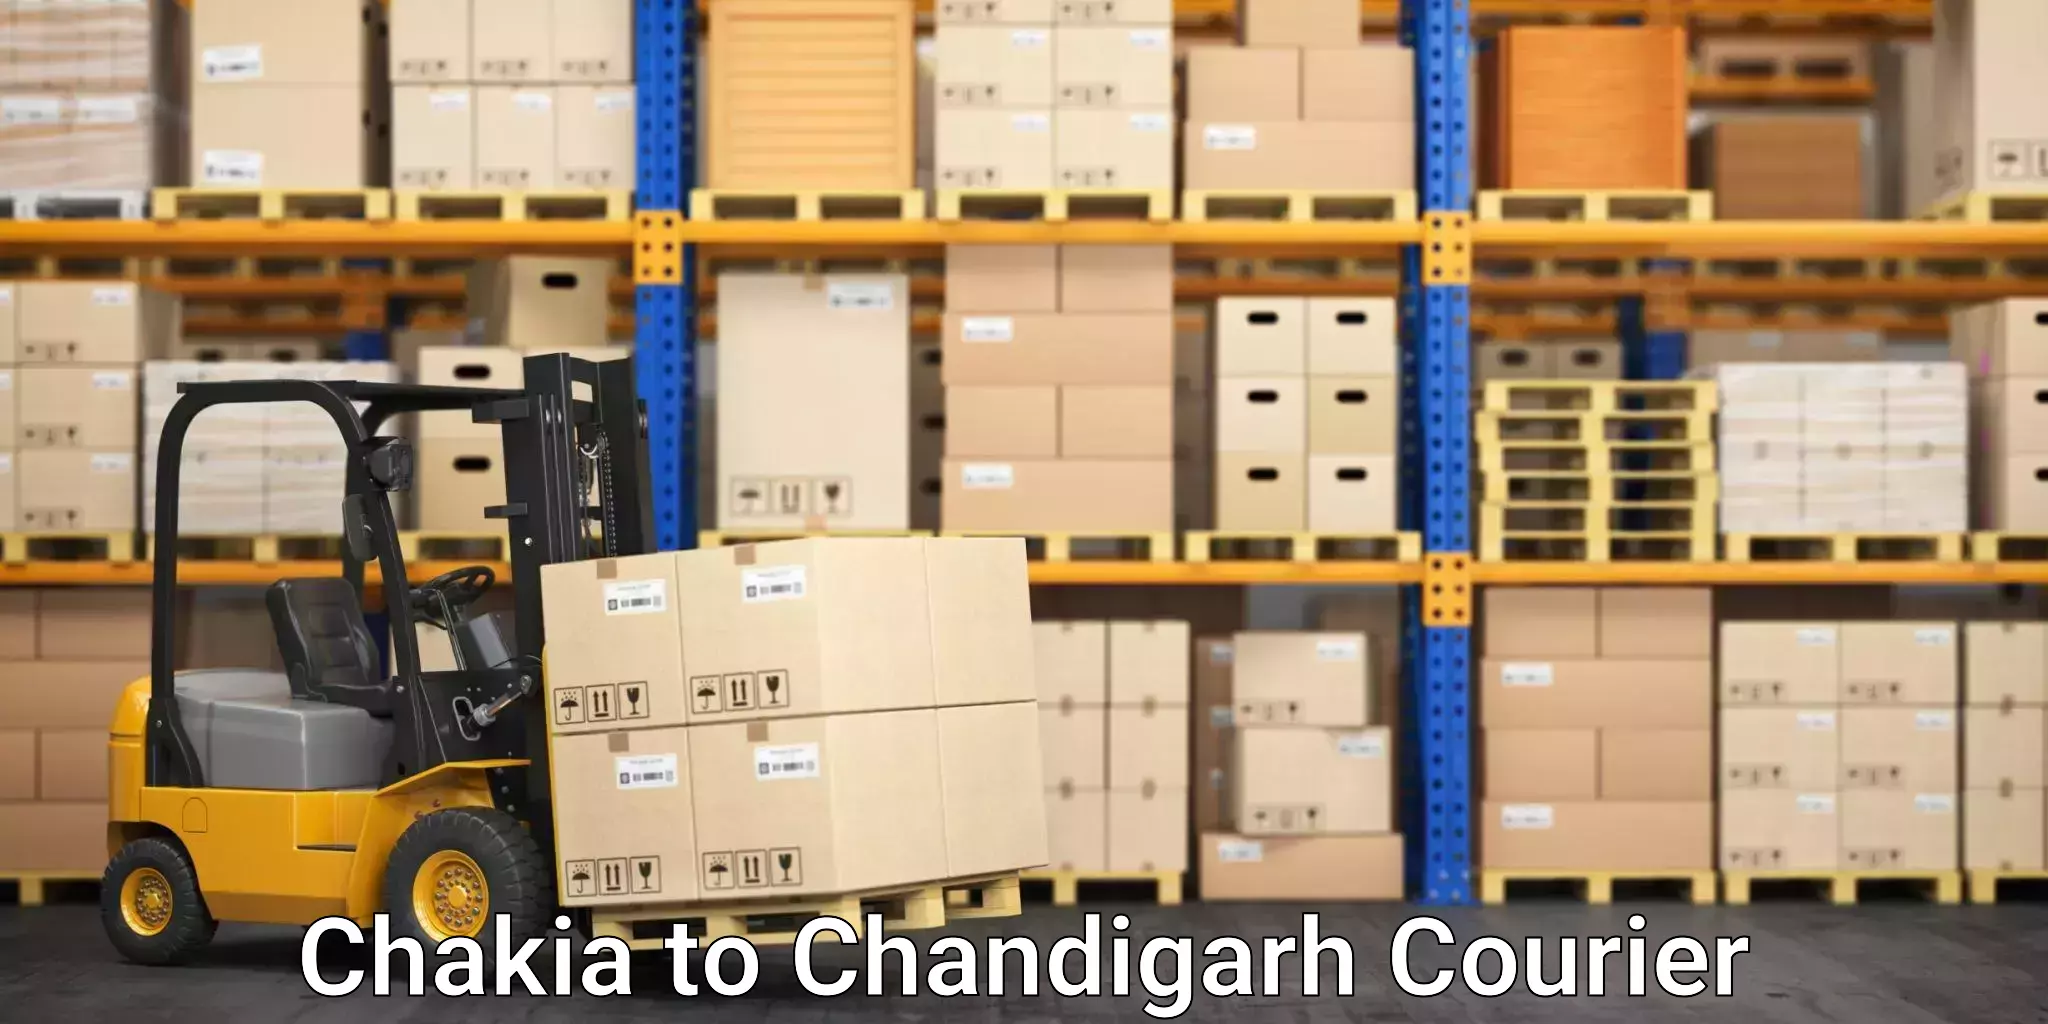 Budget-friendly movers Chakia to Chandigarh